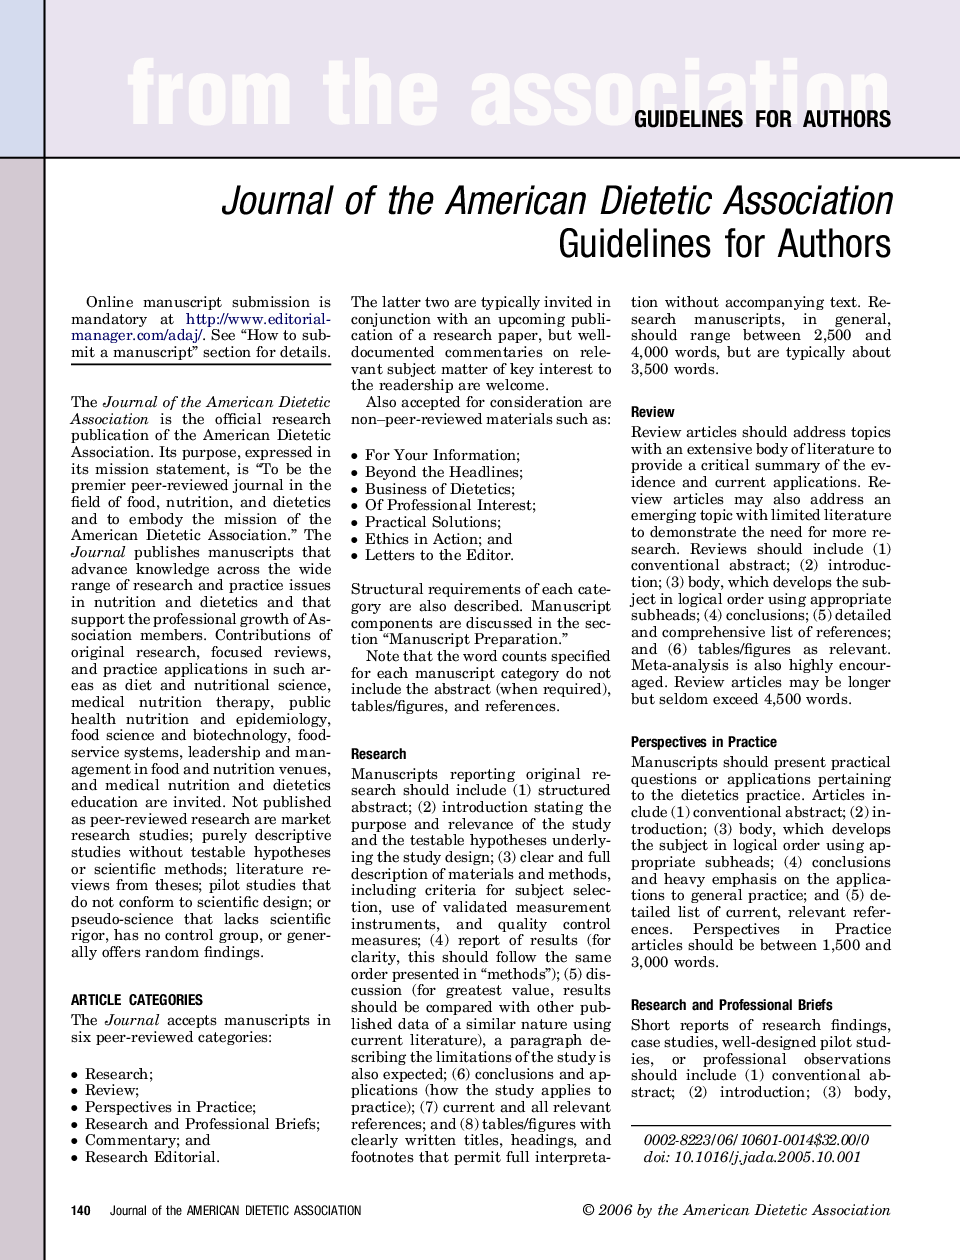 Journal of the American Dietetic Association Guidelines for Authors